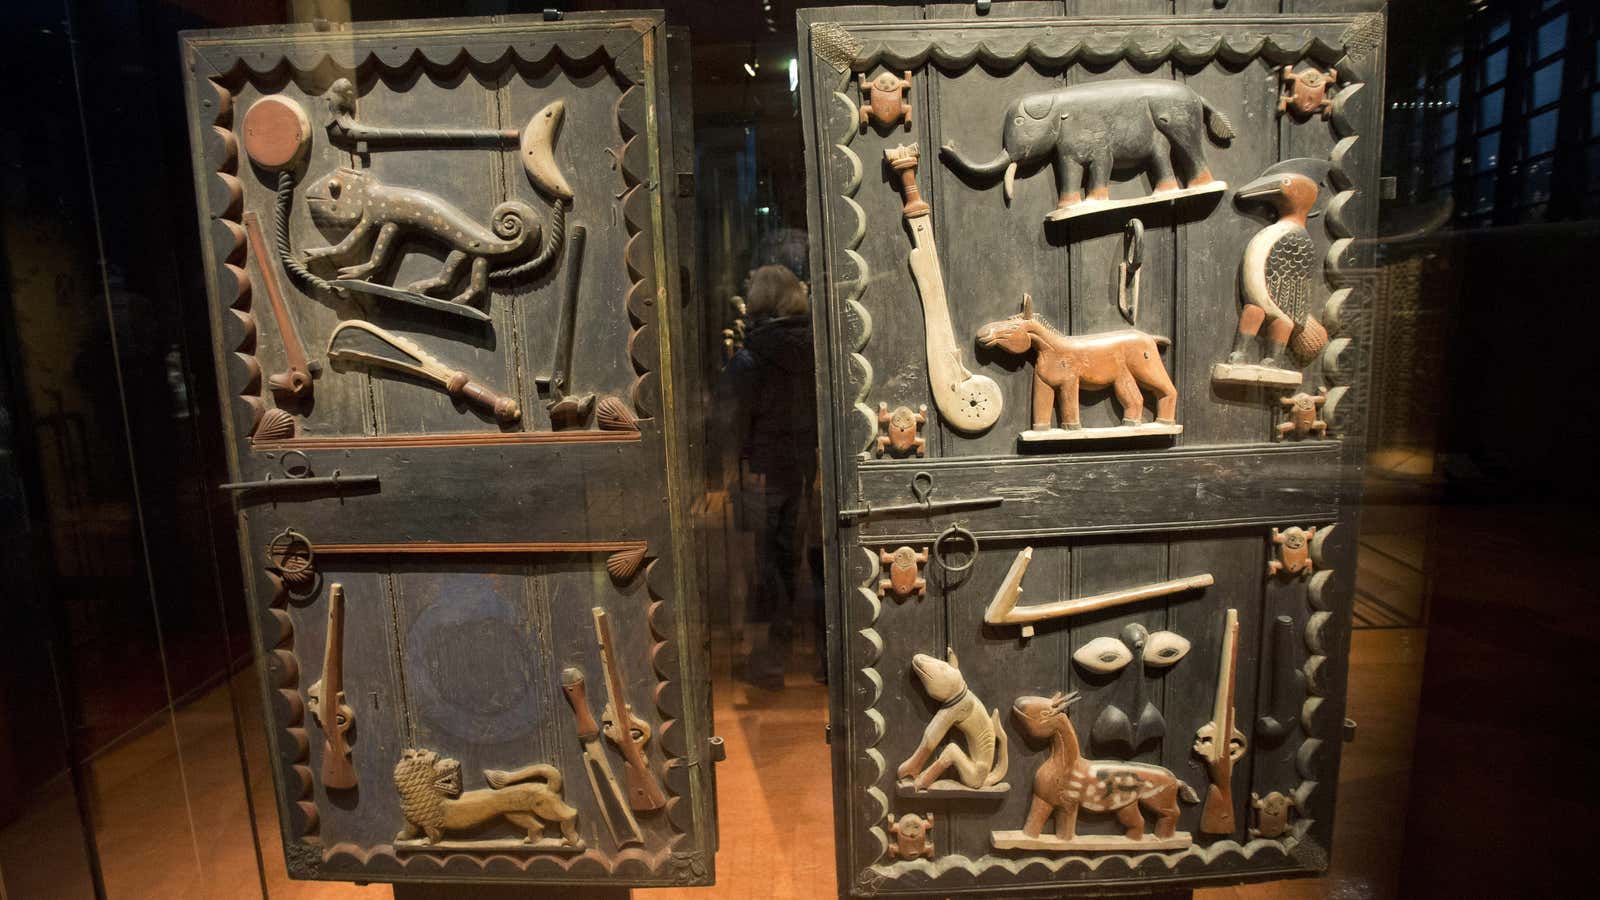 A wooden door from the king’s palace Gele of the Dahomey kingdom, dated 19th century, displayed at Quai Branly museum in Paris, France.